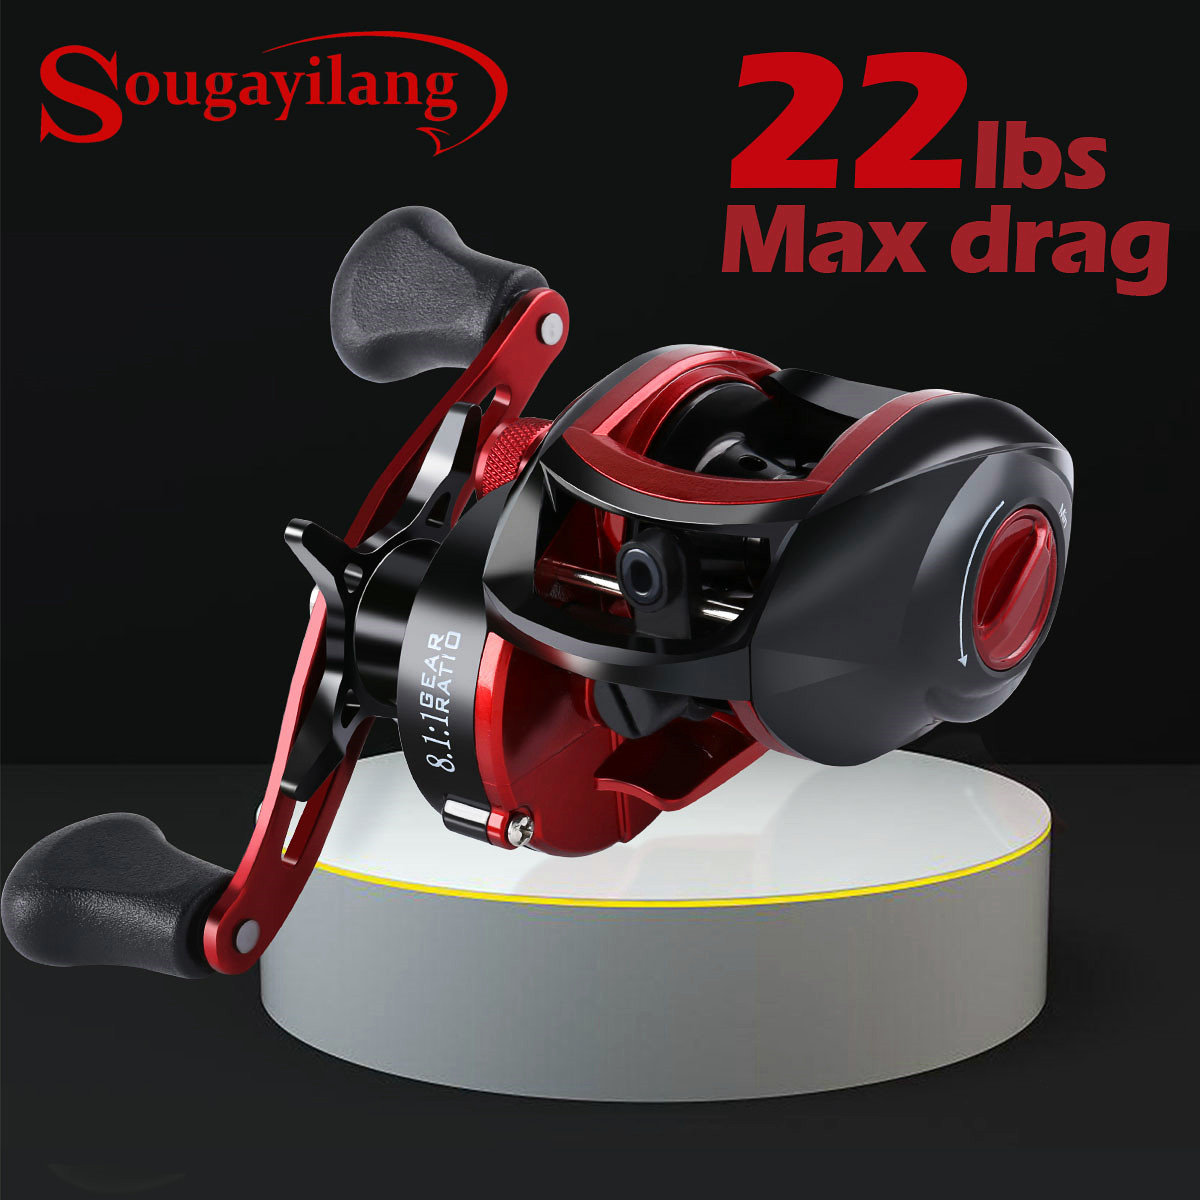 Sougayilang Baitcasting Fishing Reel - Saltwater Level Wind Reel with 4.1:1  Gear Ratio for Trolling, Drag Reels for Boat and Ocean Fishing - Ideal for